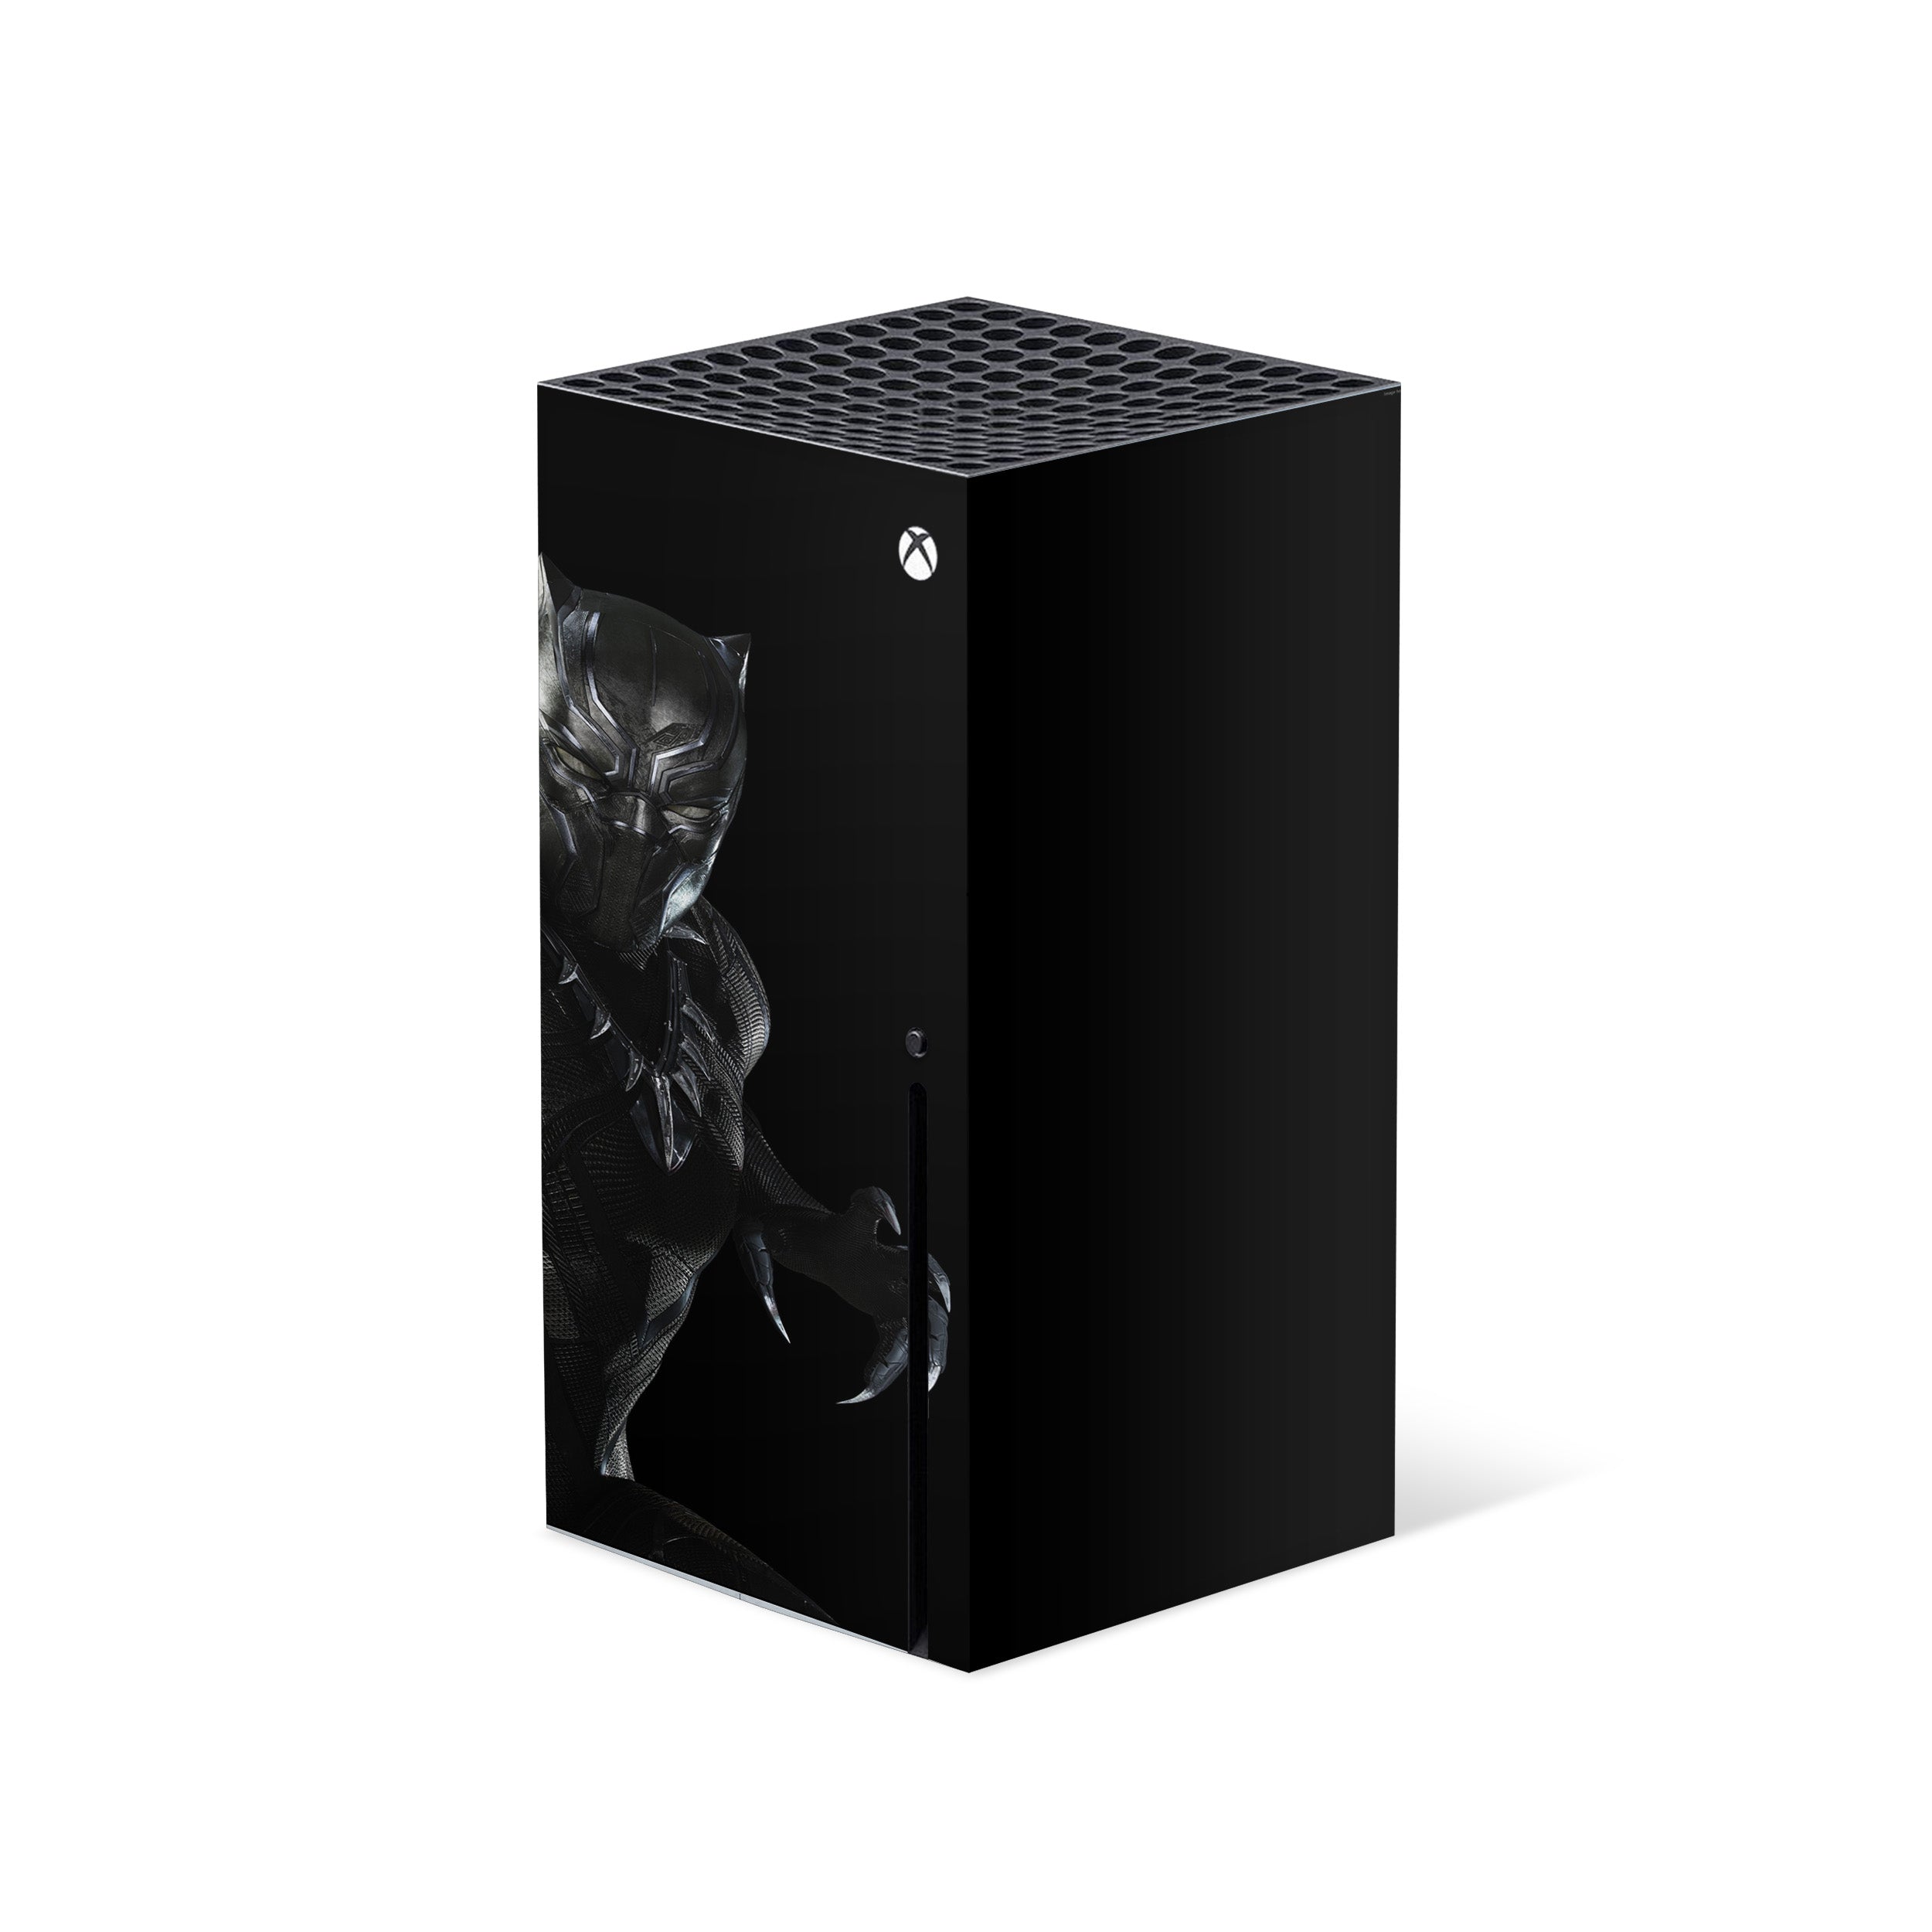 A video game skin featuring a Marvel Black Panther design for the Xbox Series X.